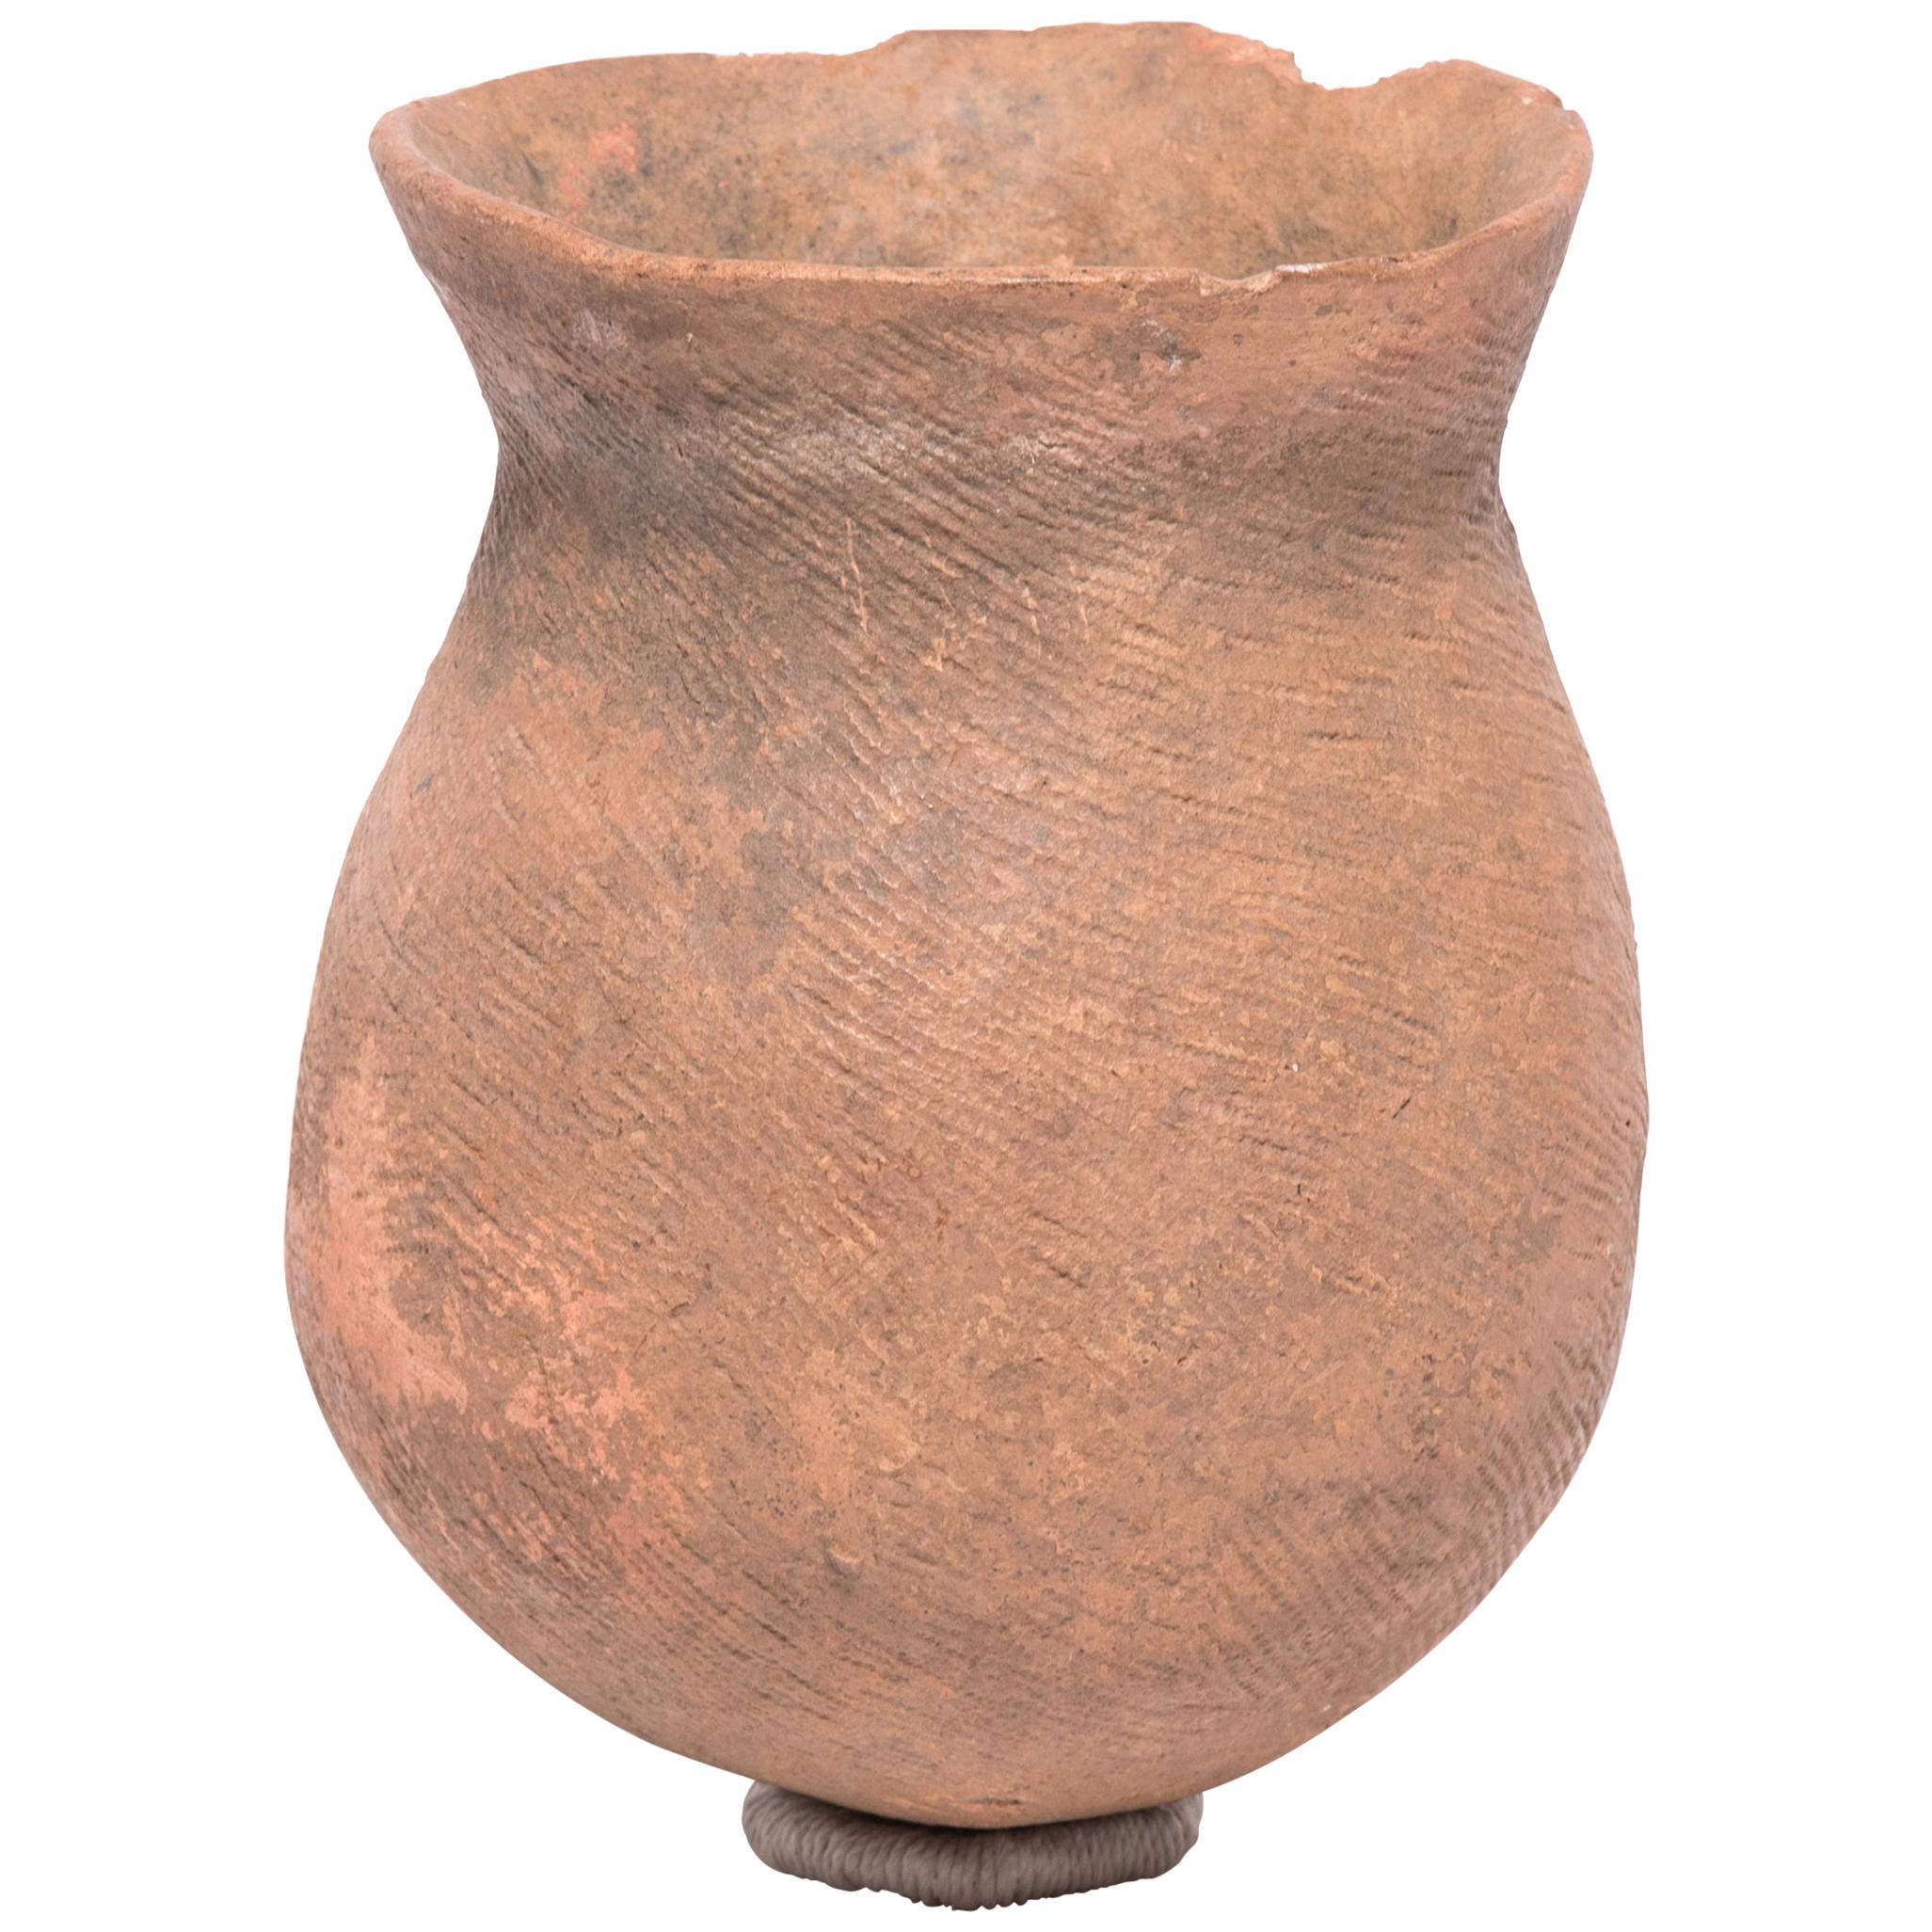 Early 20th Century African Storage Vessel